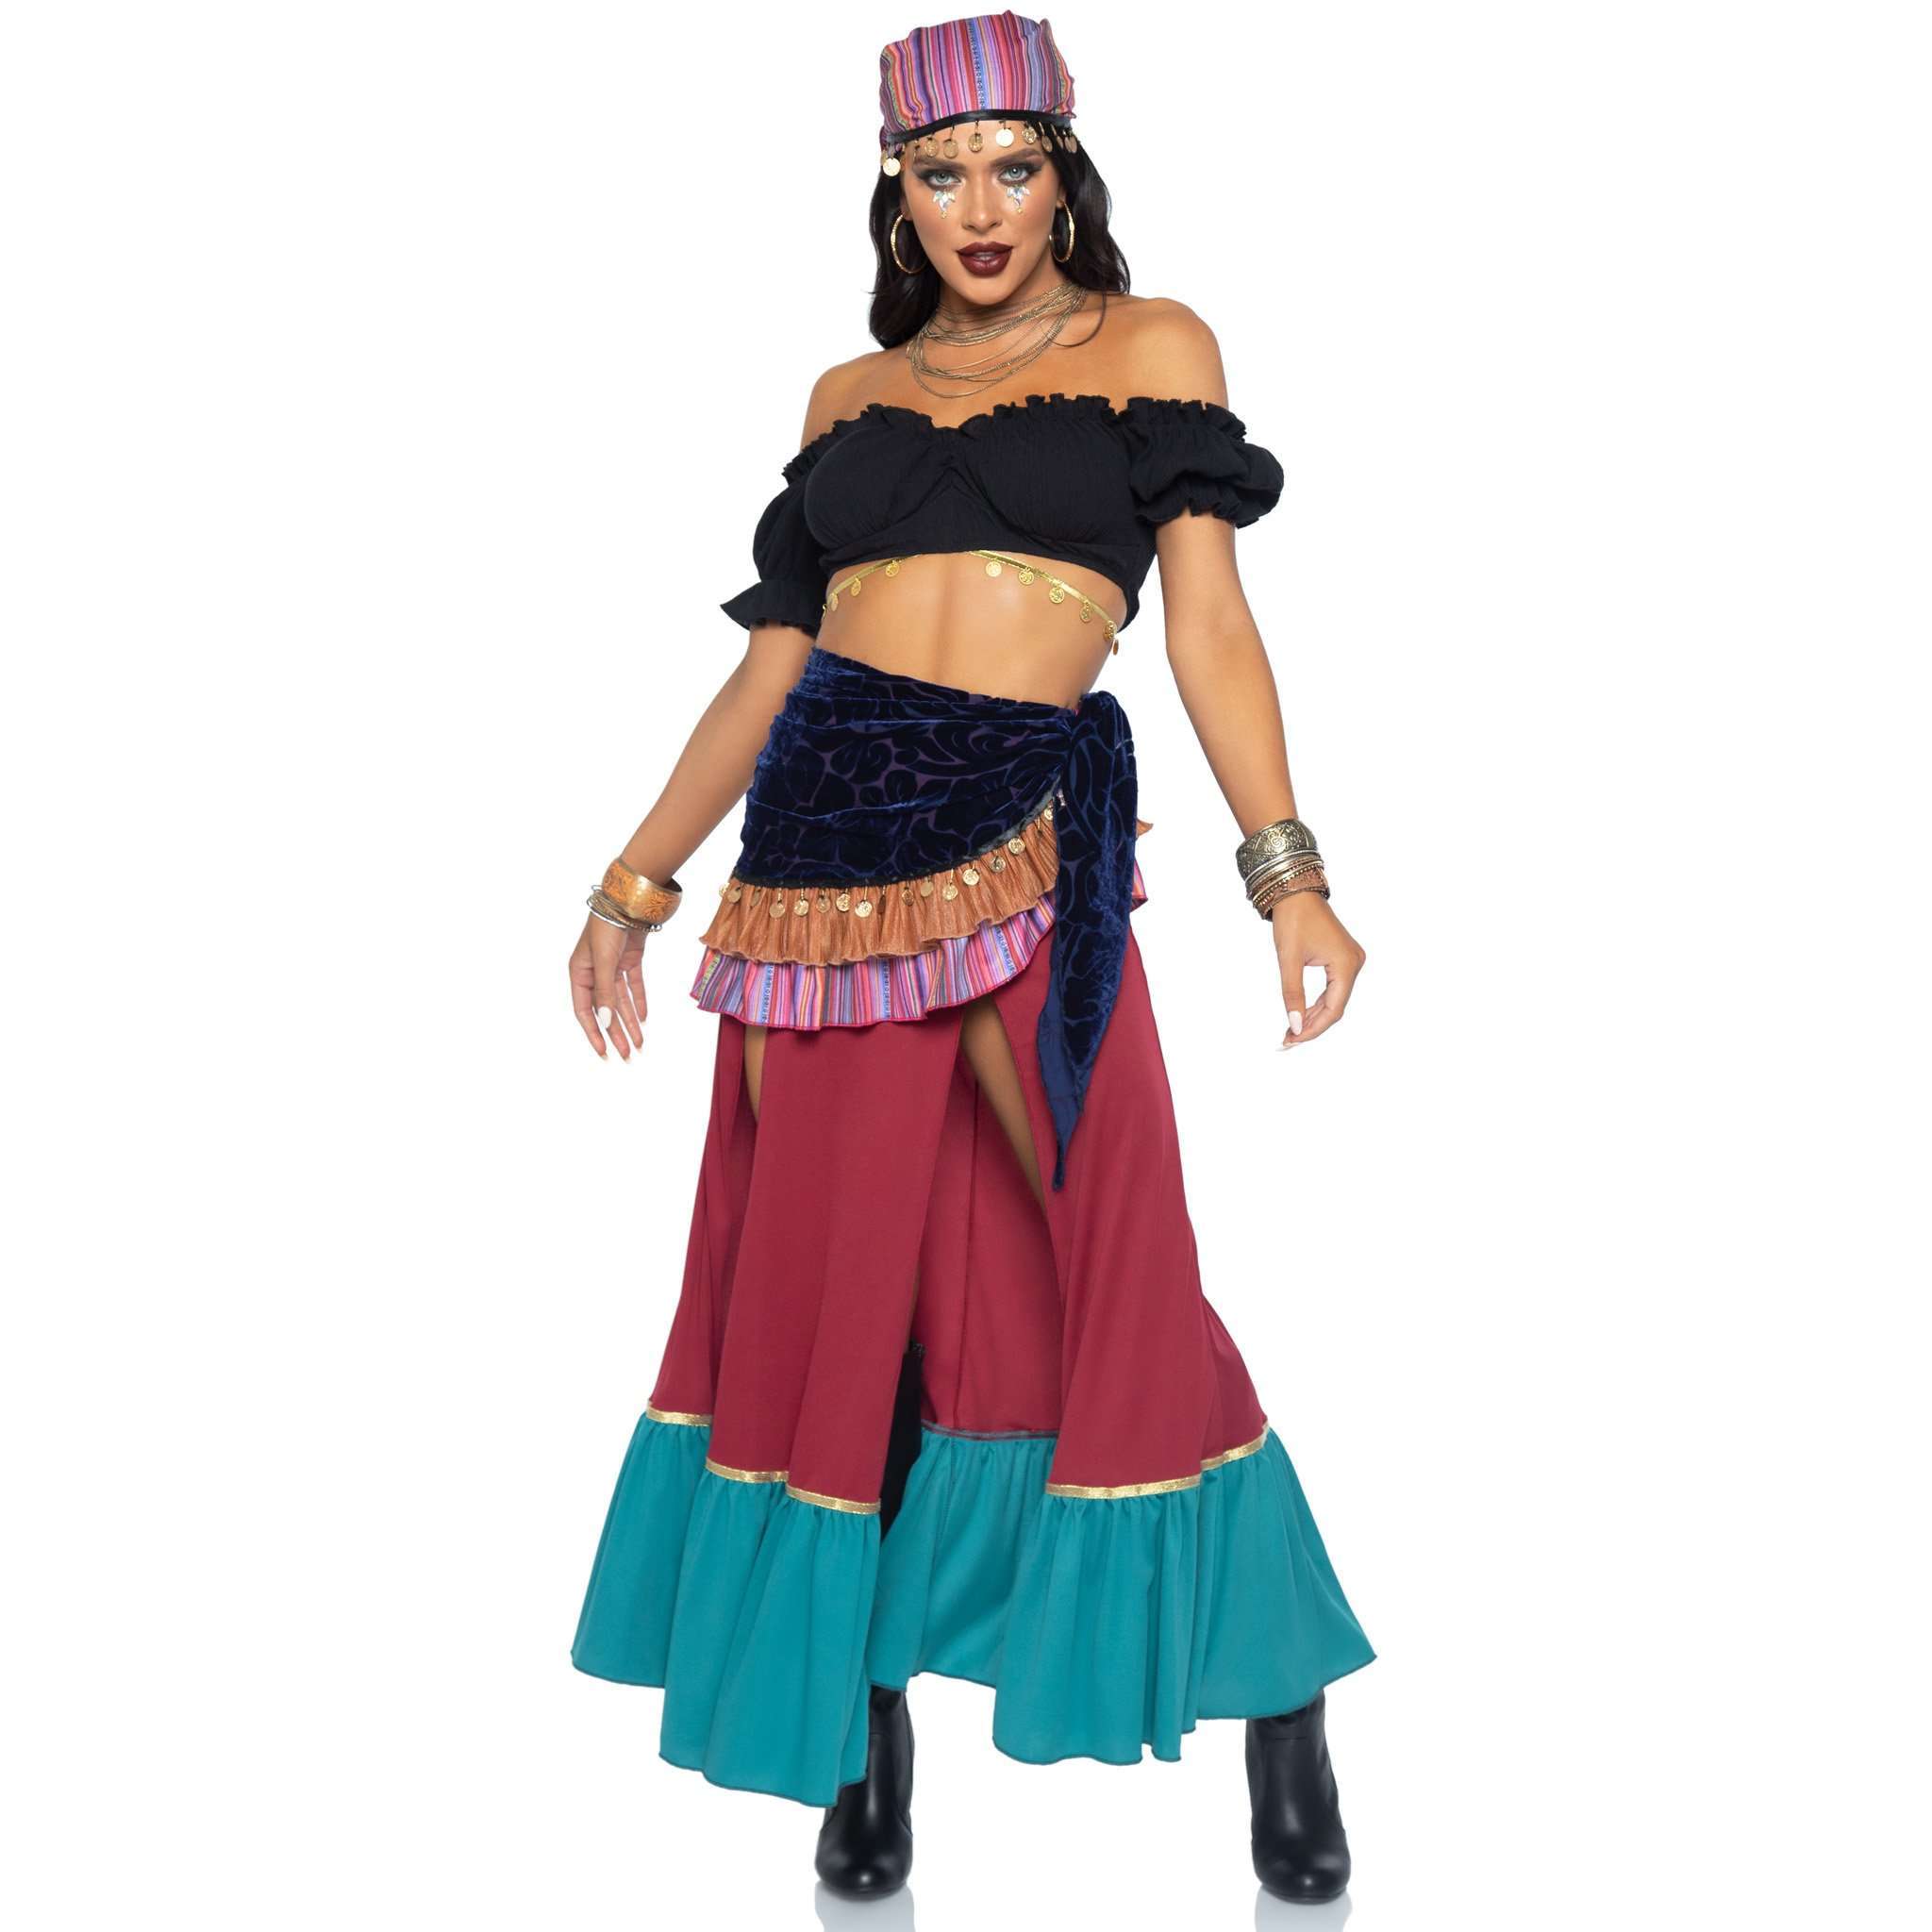 Crystal Ball Beauty Gypsy Queen Adult Costume